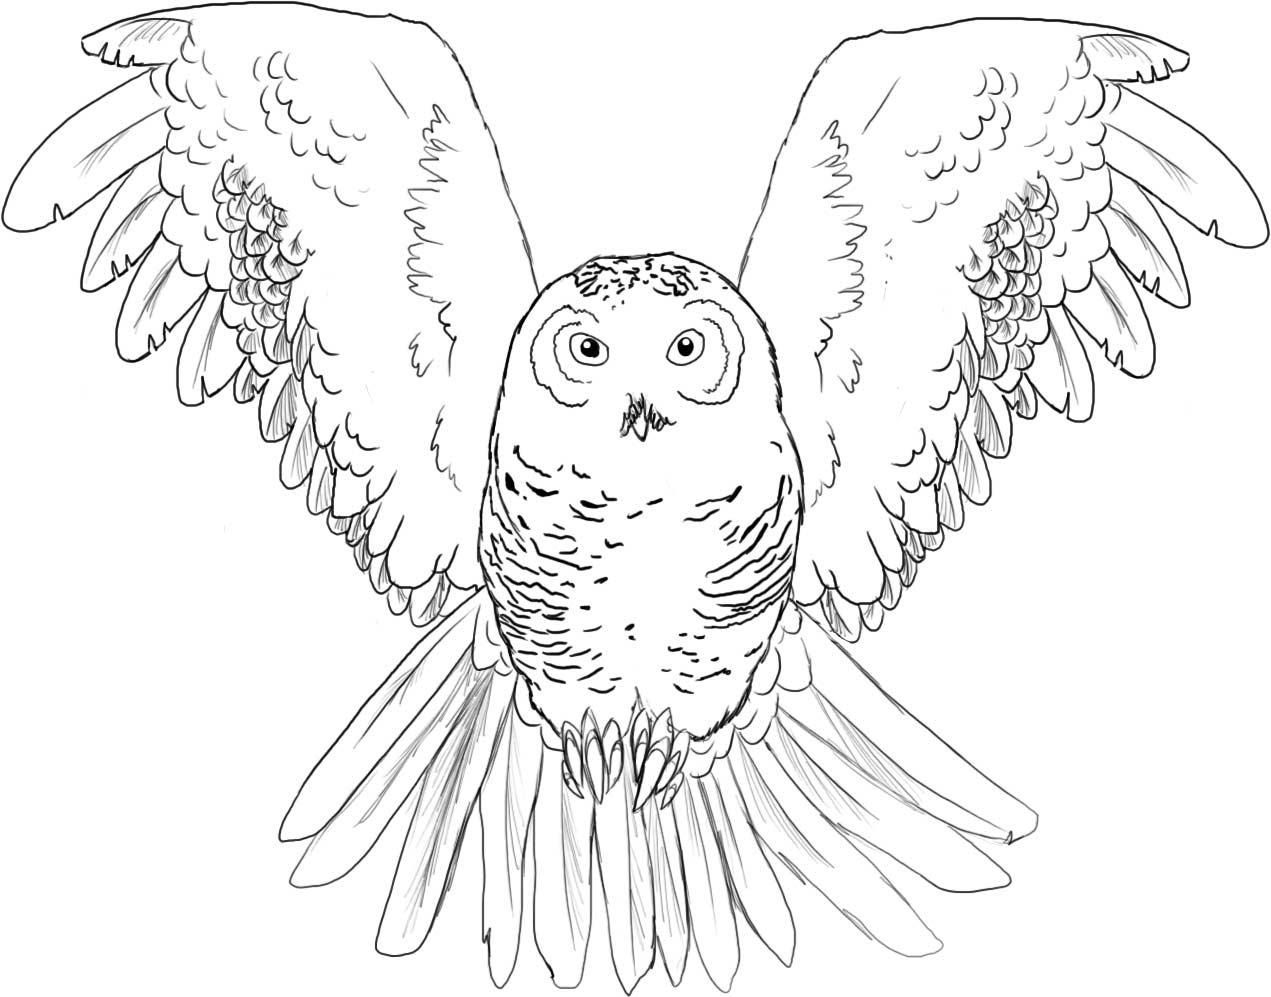 Baby Owl - Coloring Pages for Kids and for Adults